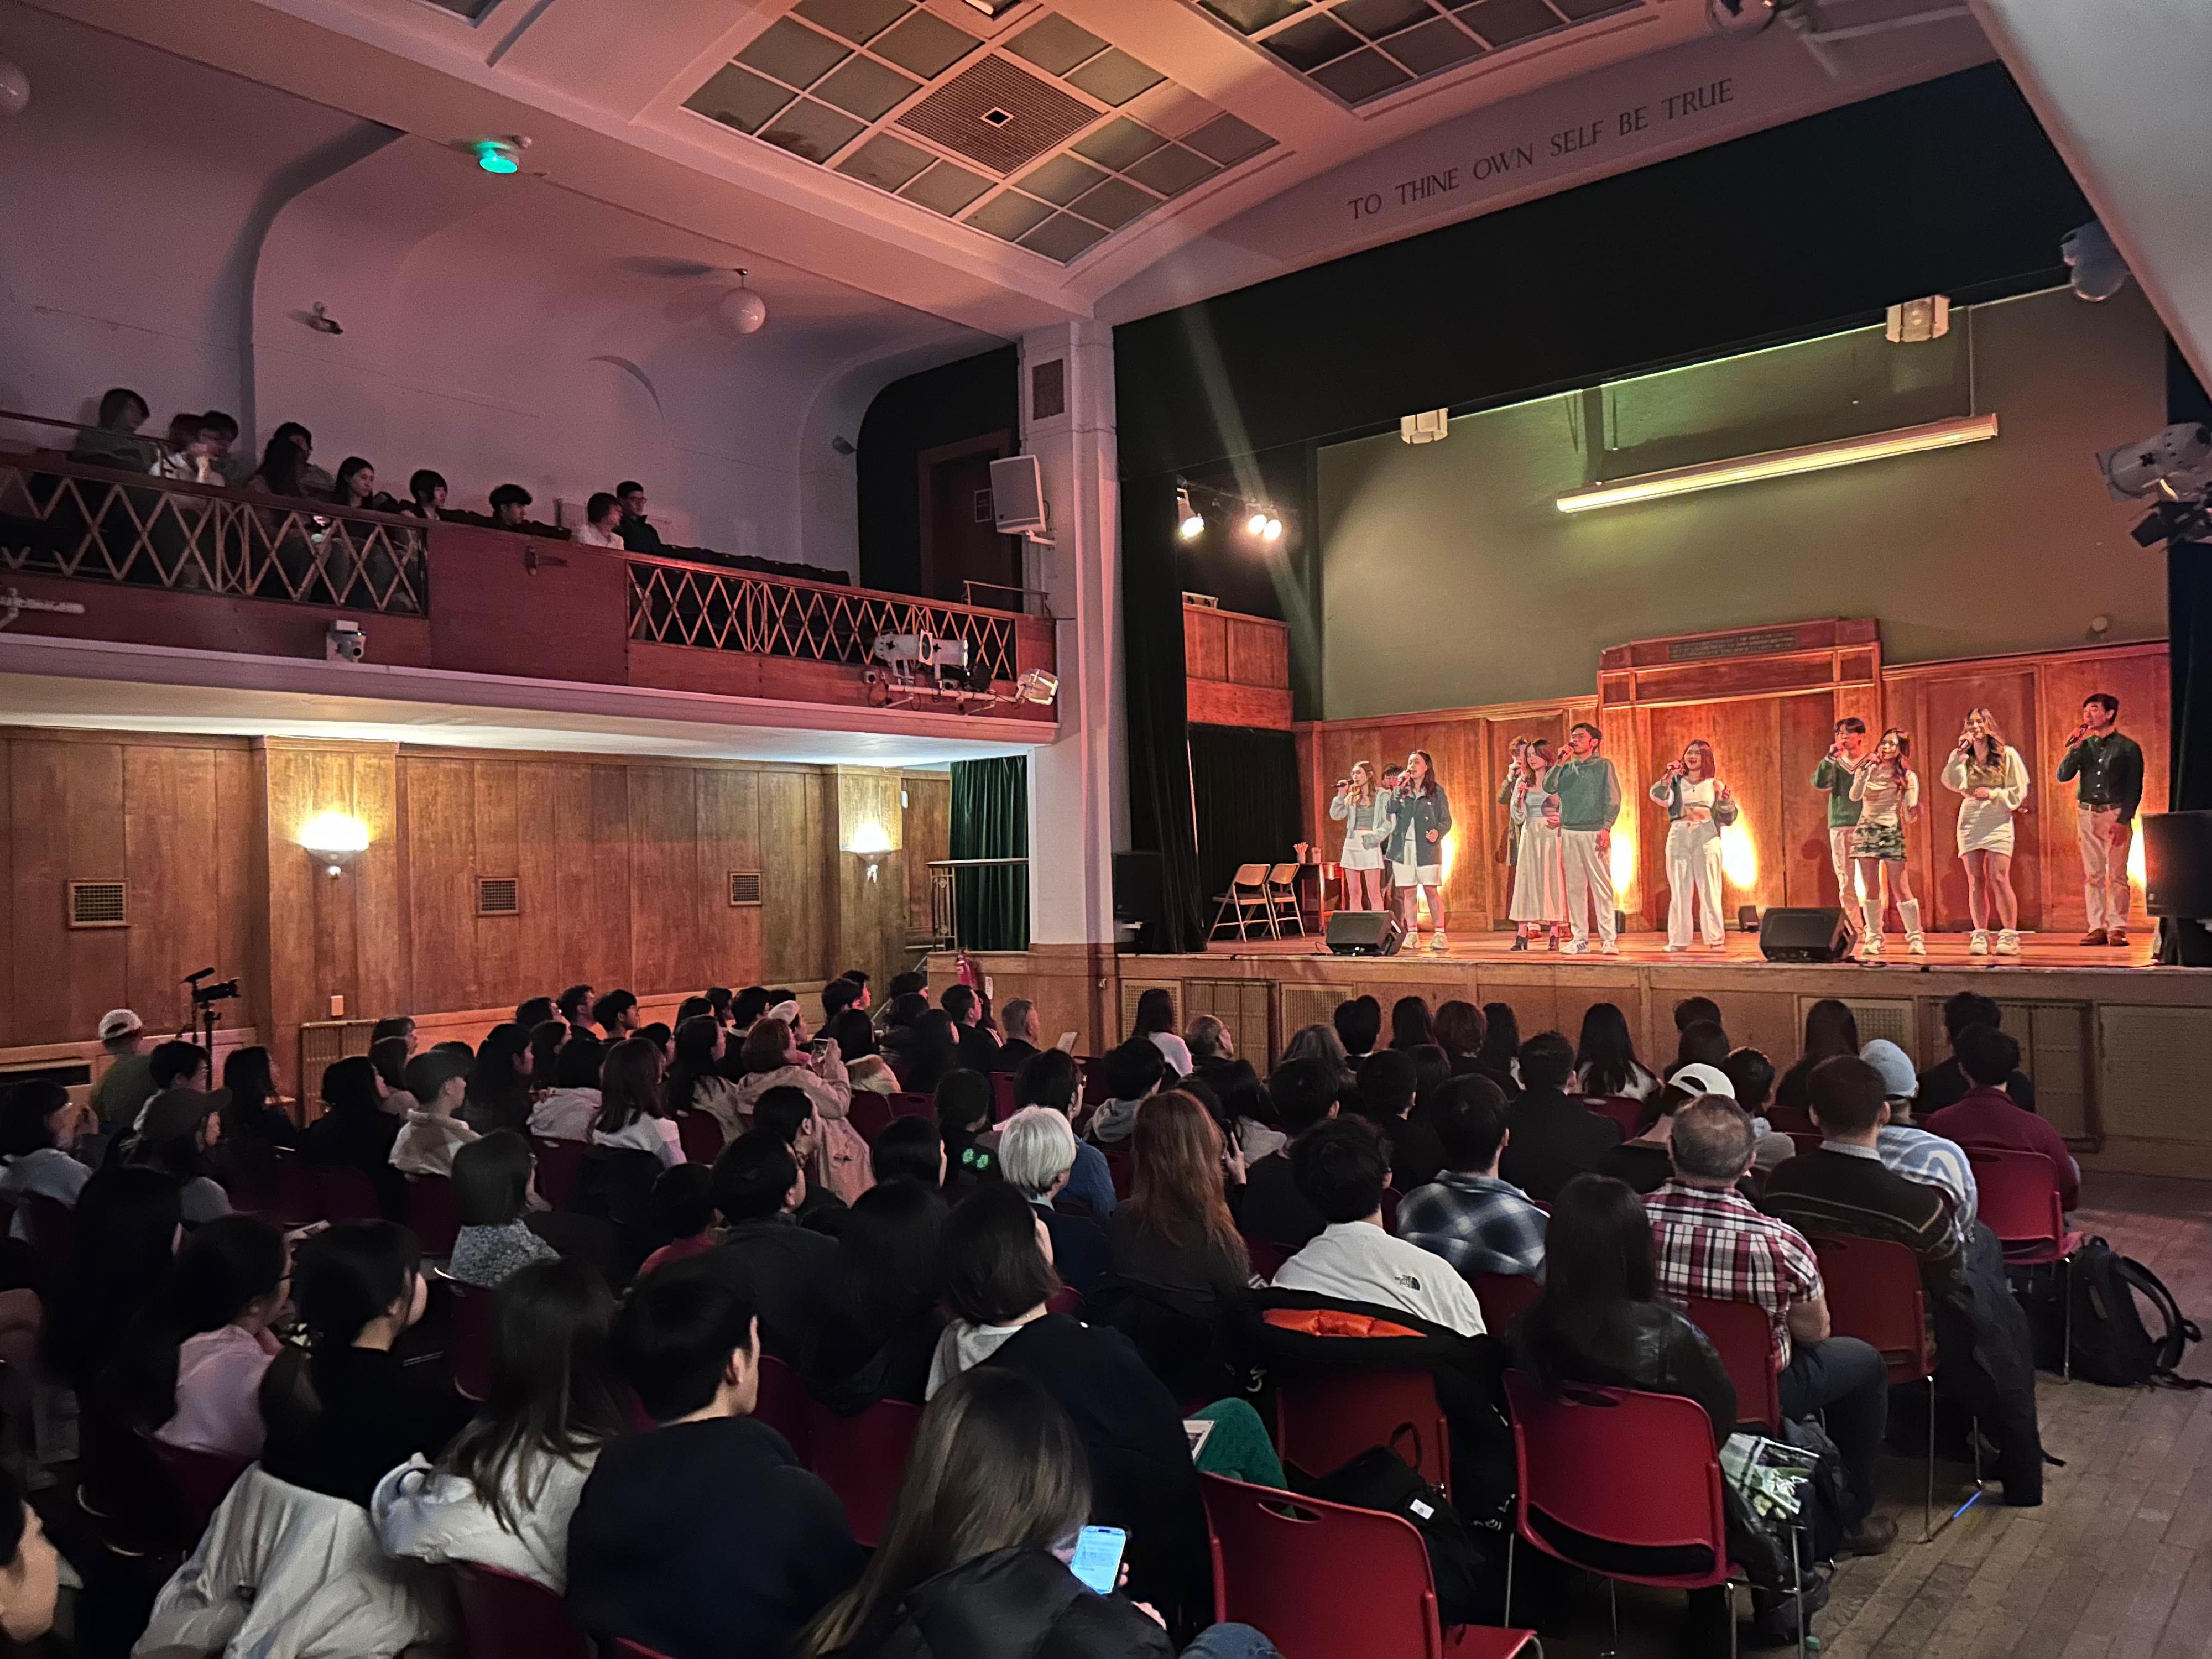 The Hong Kong Economic and Trade Office, London supported an a cappella concert of The Mockingbird at Conway Hall in London. Photo shows the group showcasing their music talent at the concert on March 27 (London time).

